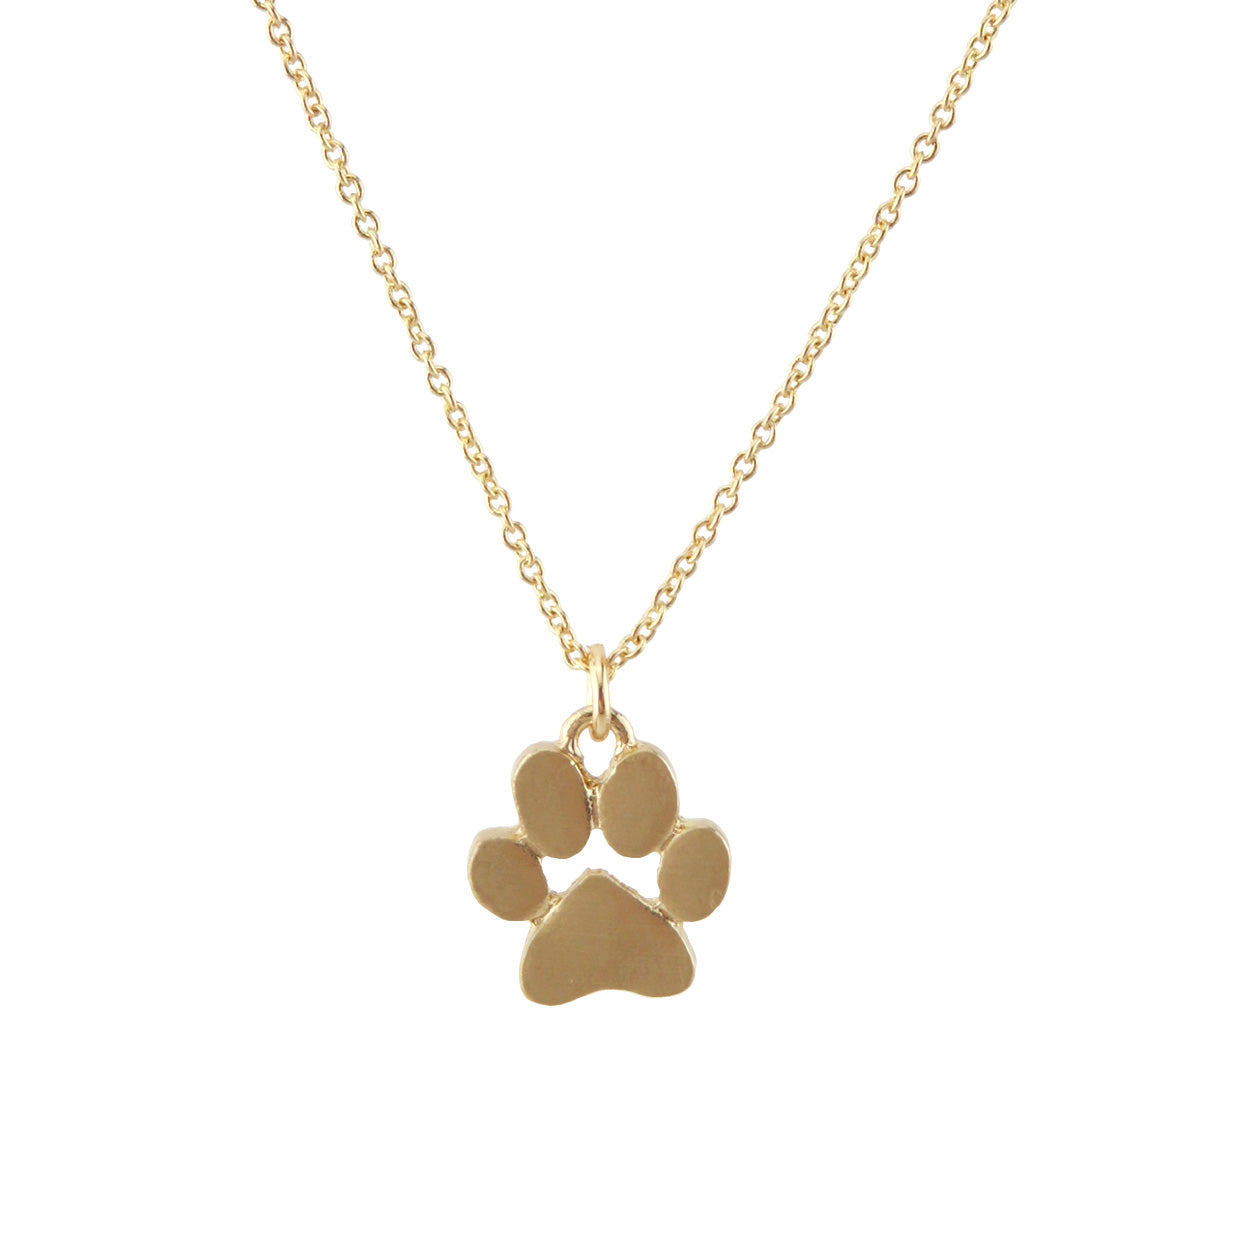 Paw Print Necklace - Gold